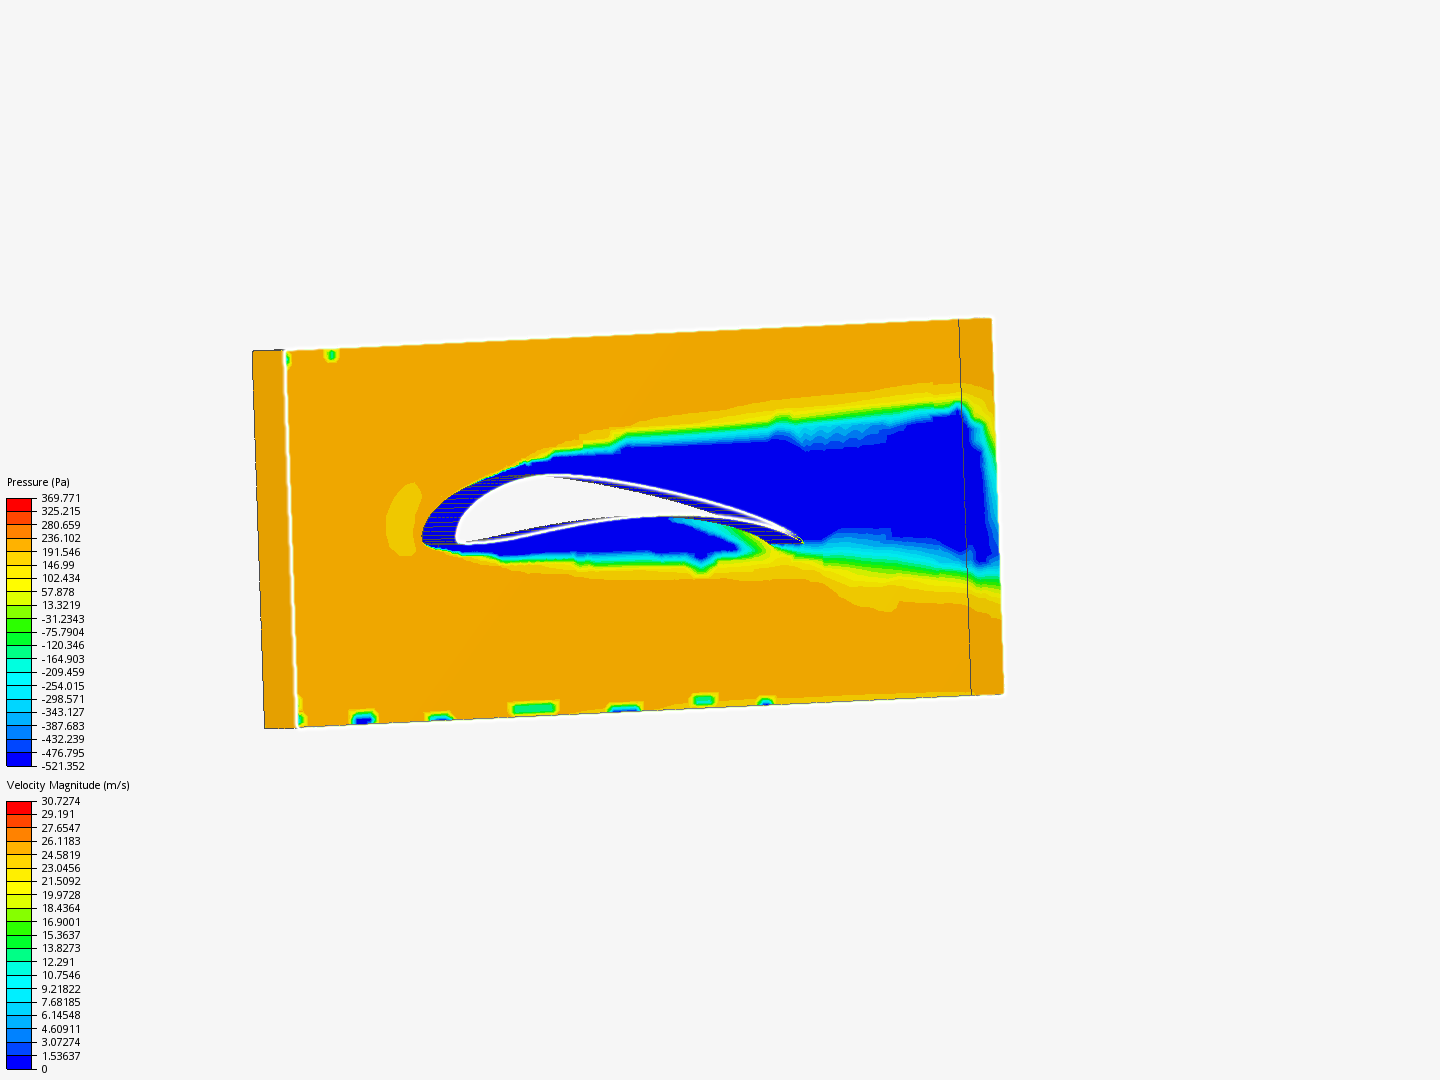 wing cfd image